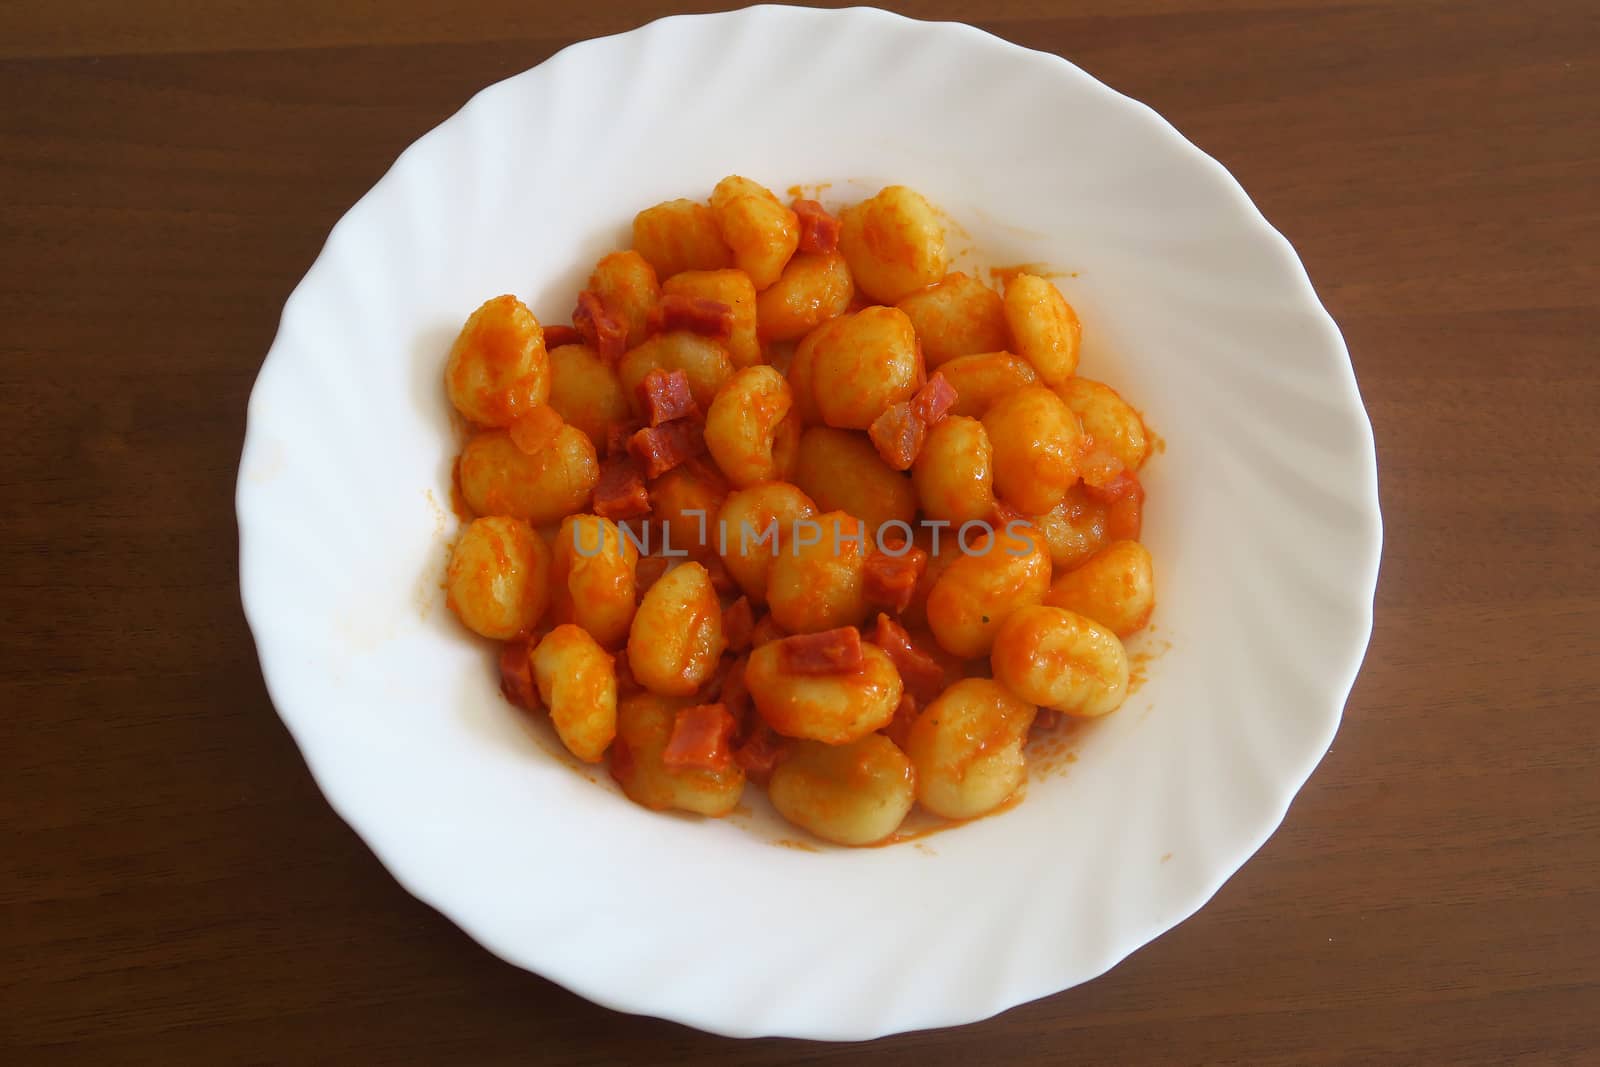 Potato dumplings, a typical Italian pasta, here served with tomato sauce and ham